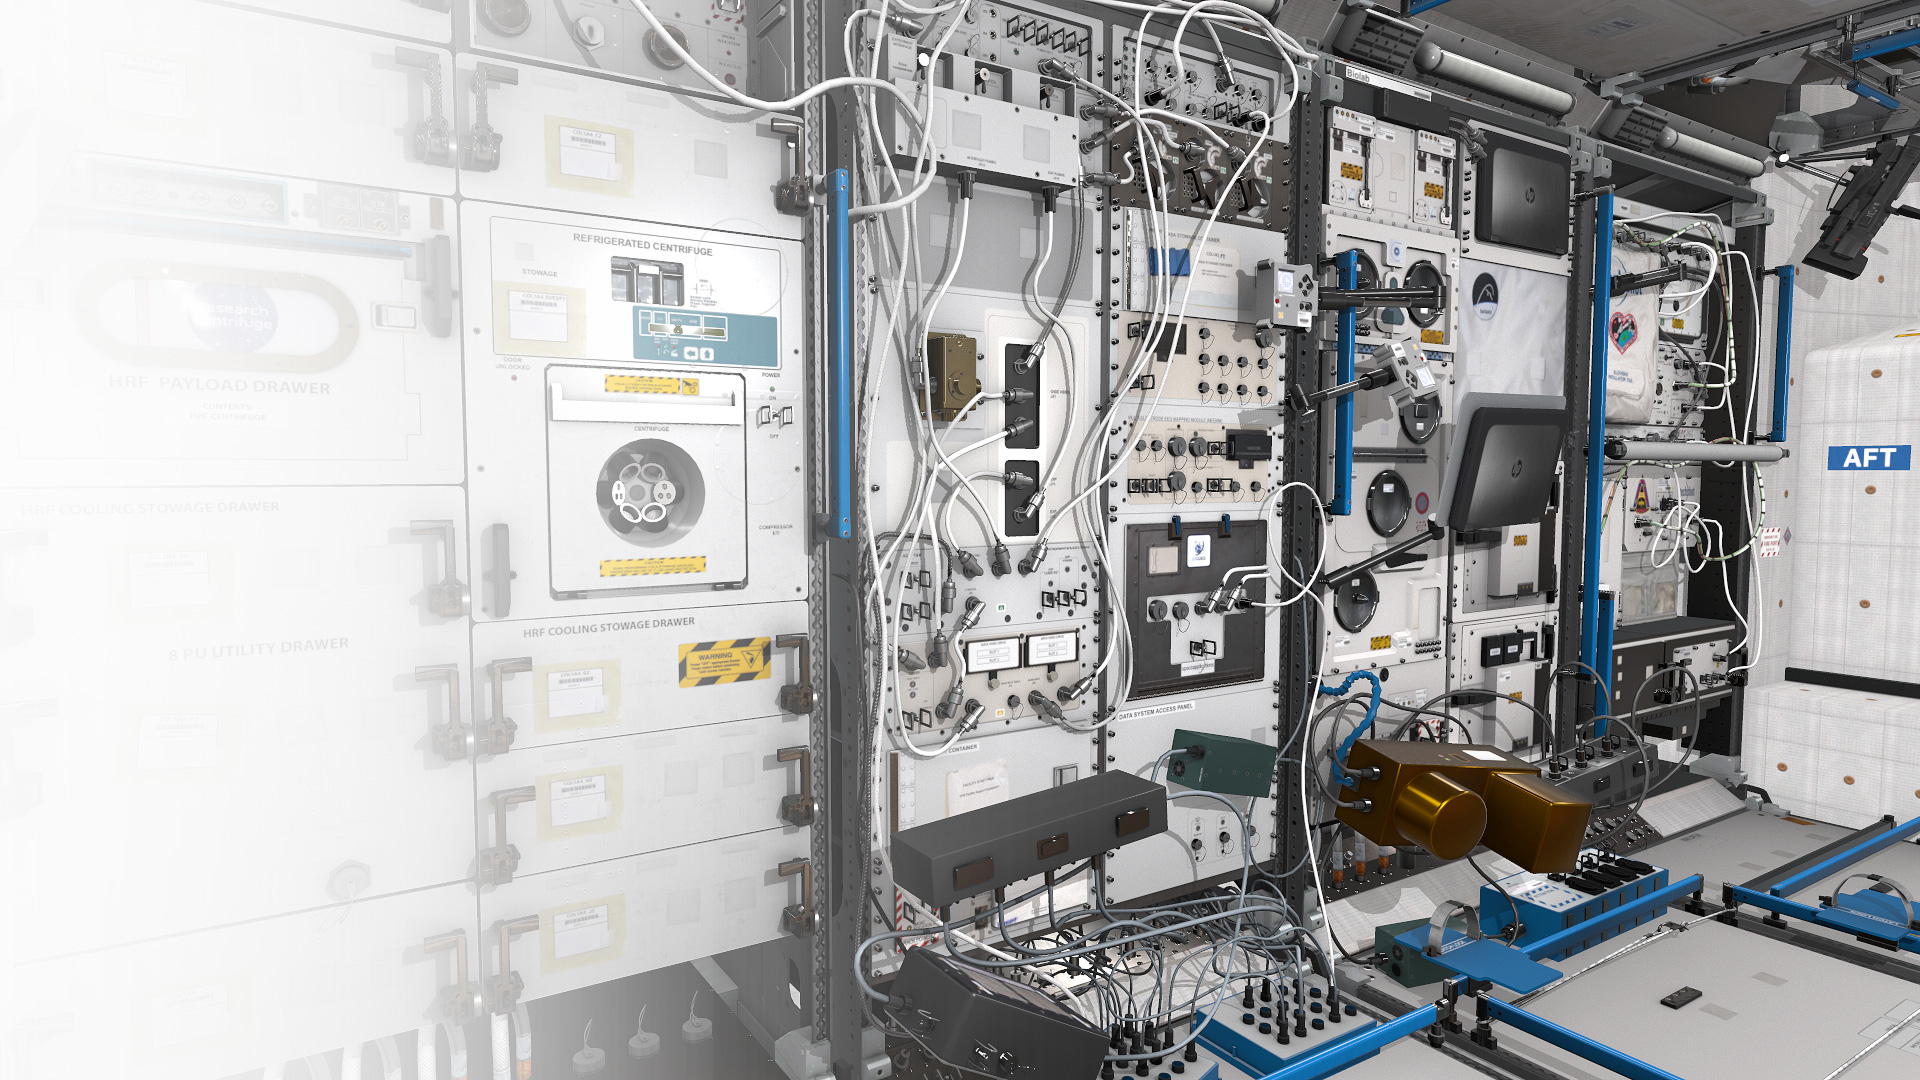 Virtual Reality Training Simulator for the ISS